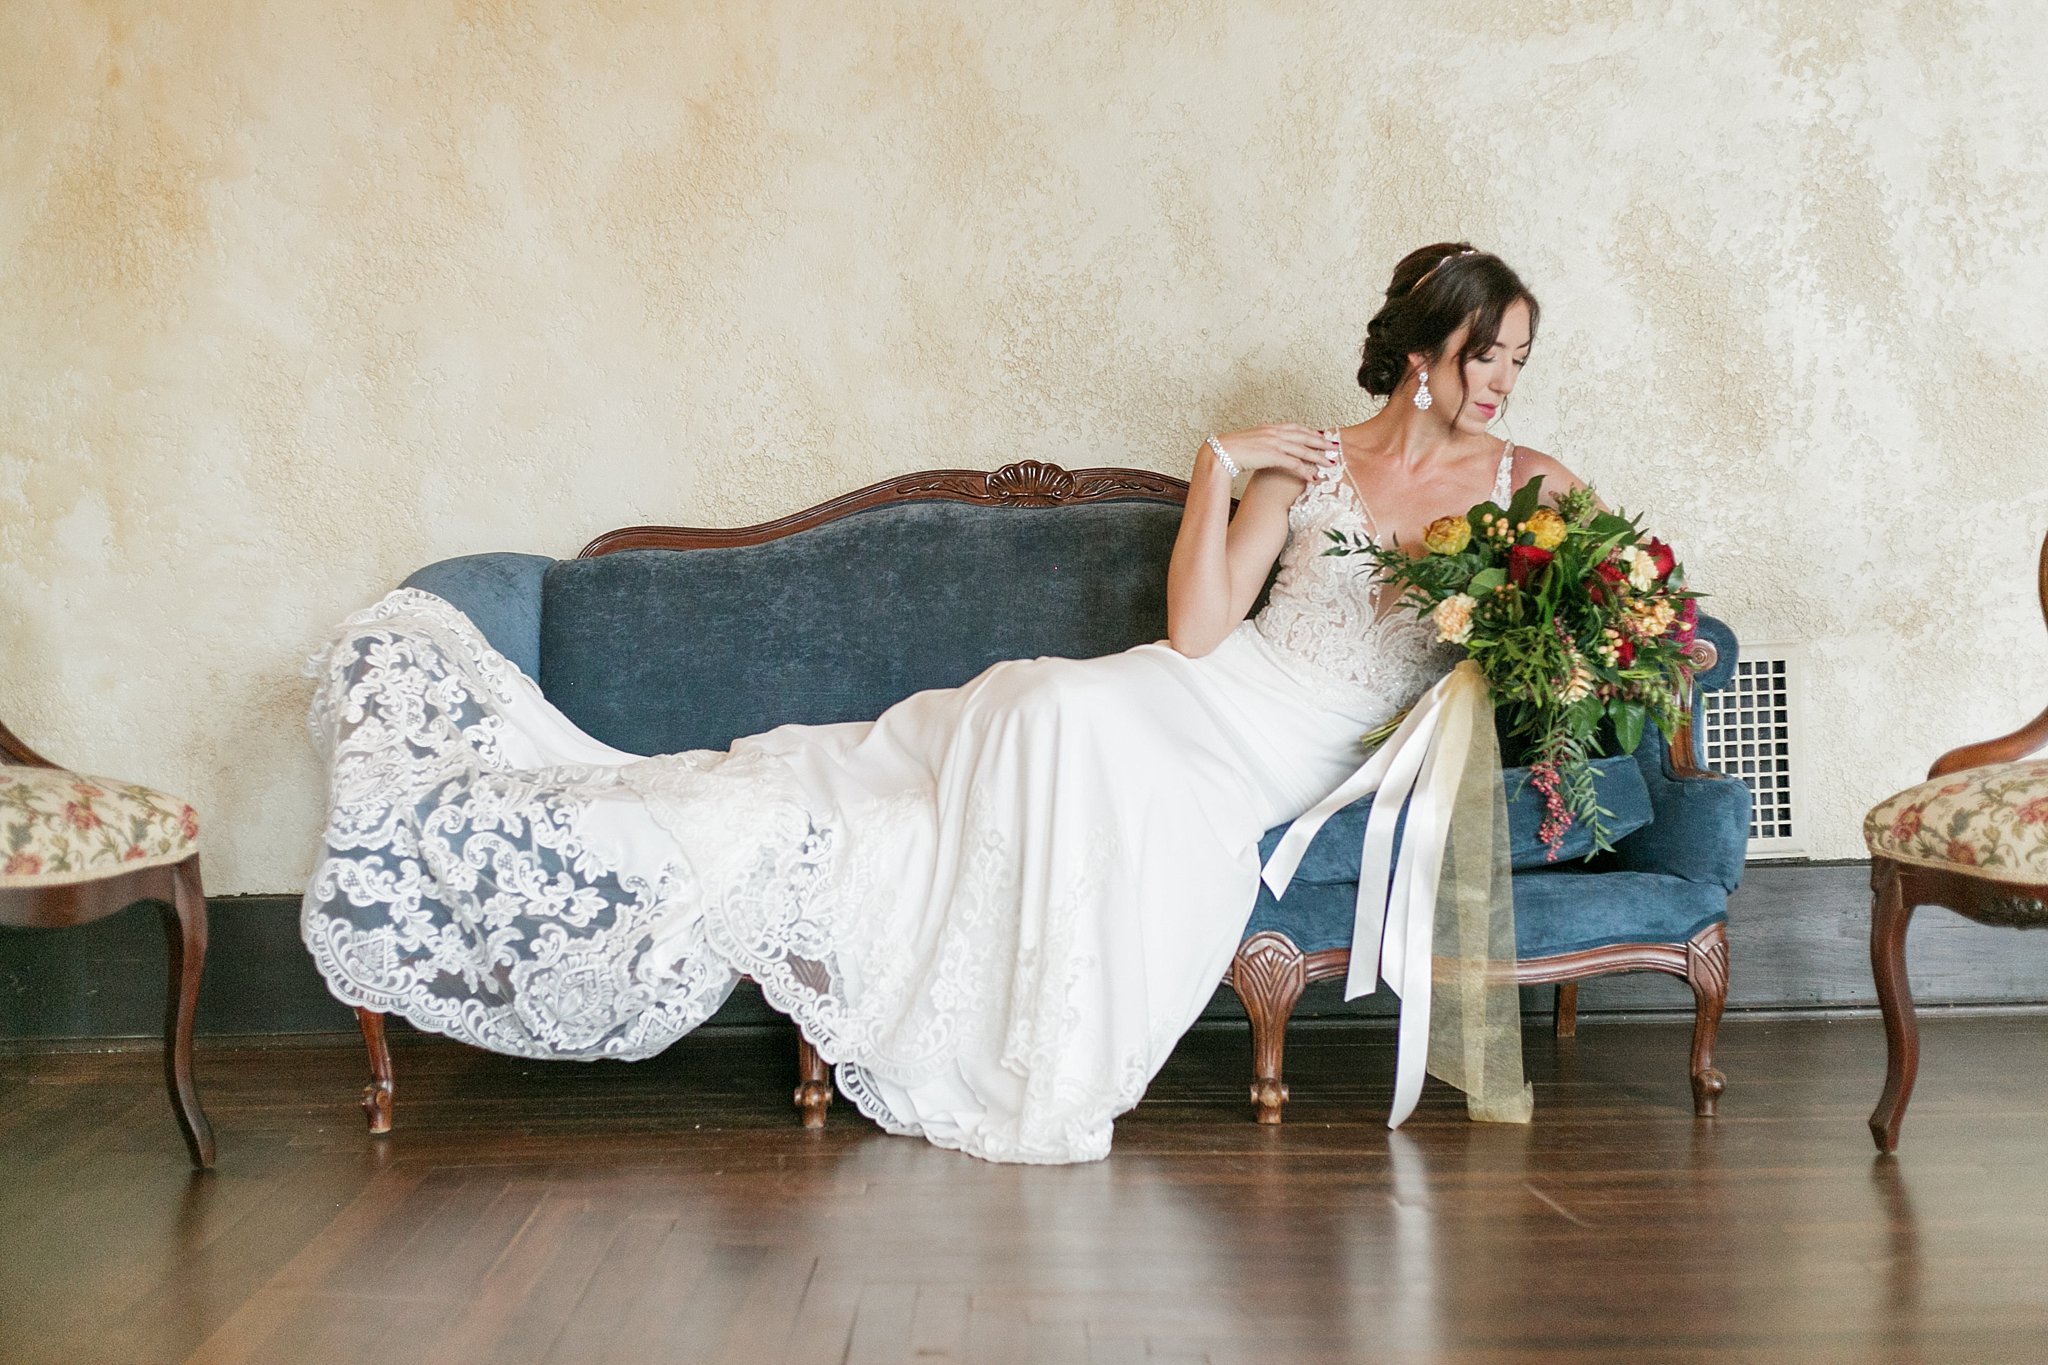 Full shot of the bride lounging on an antique blue couch.